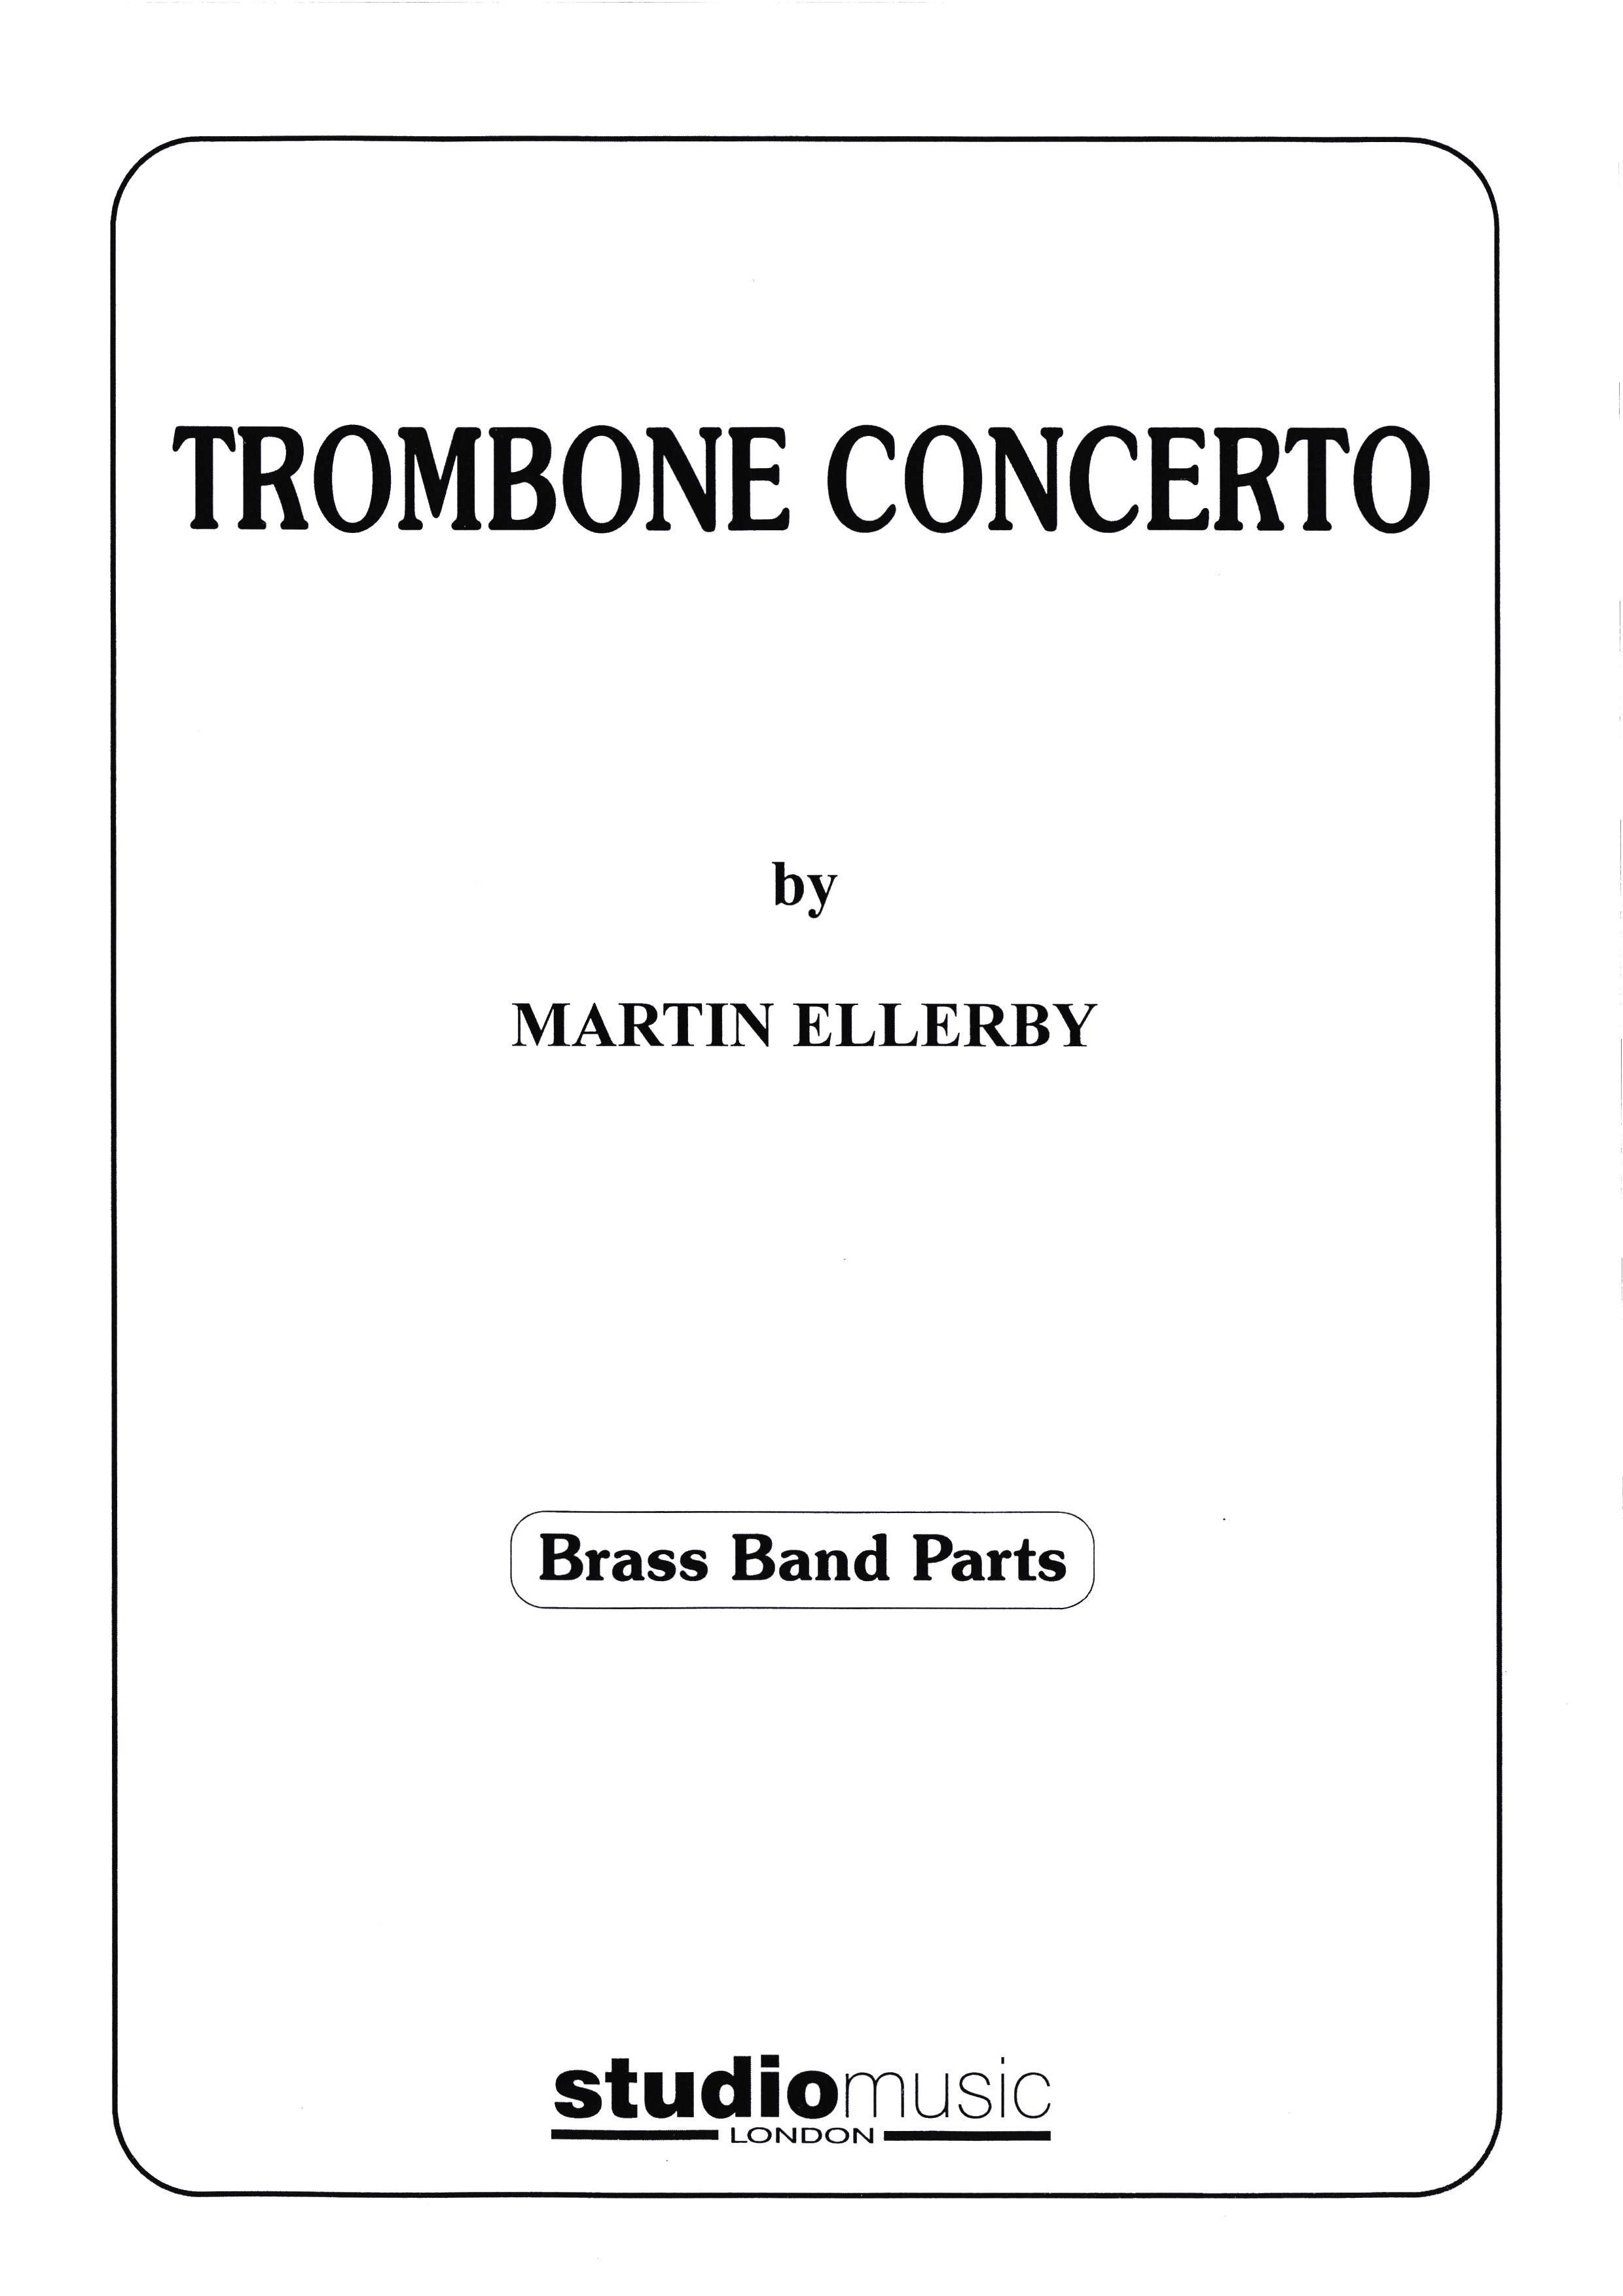 Trombone Concerto (Trombone Solo with Brass Band - Score and Parts)